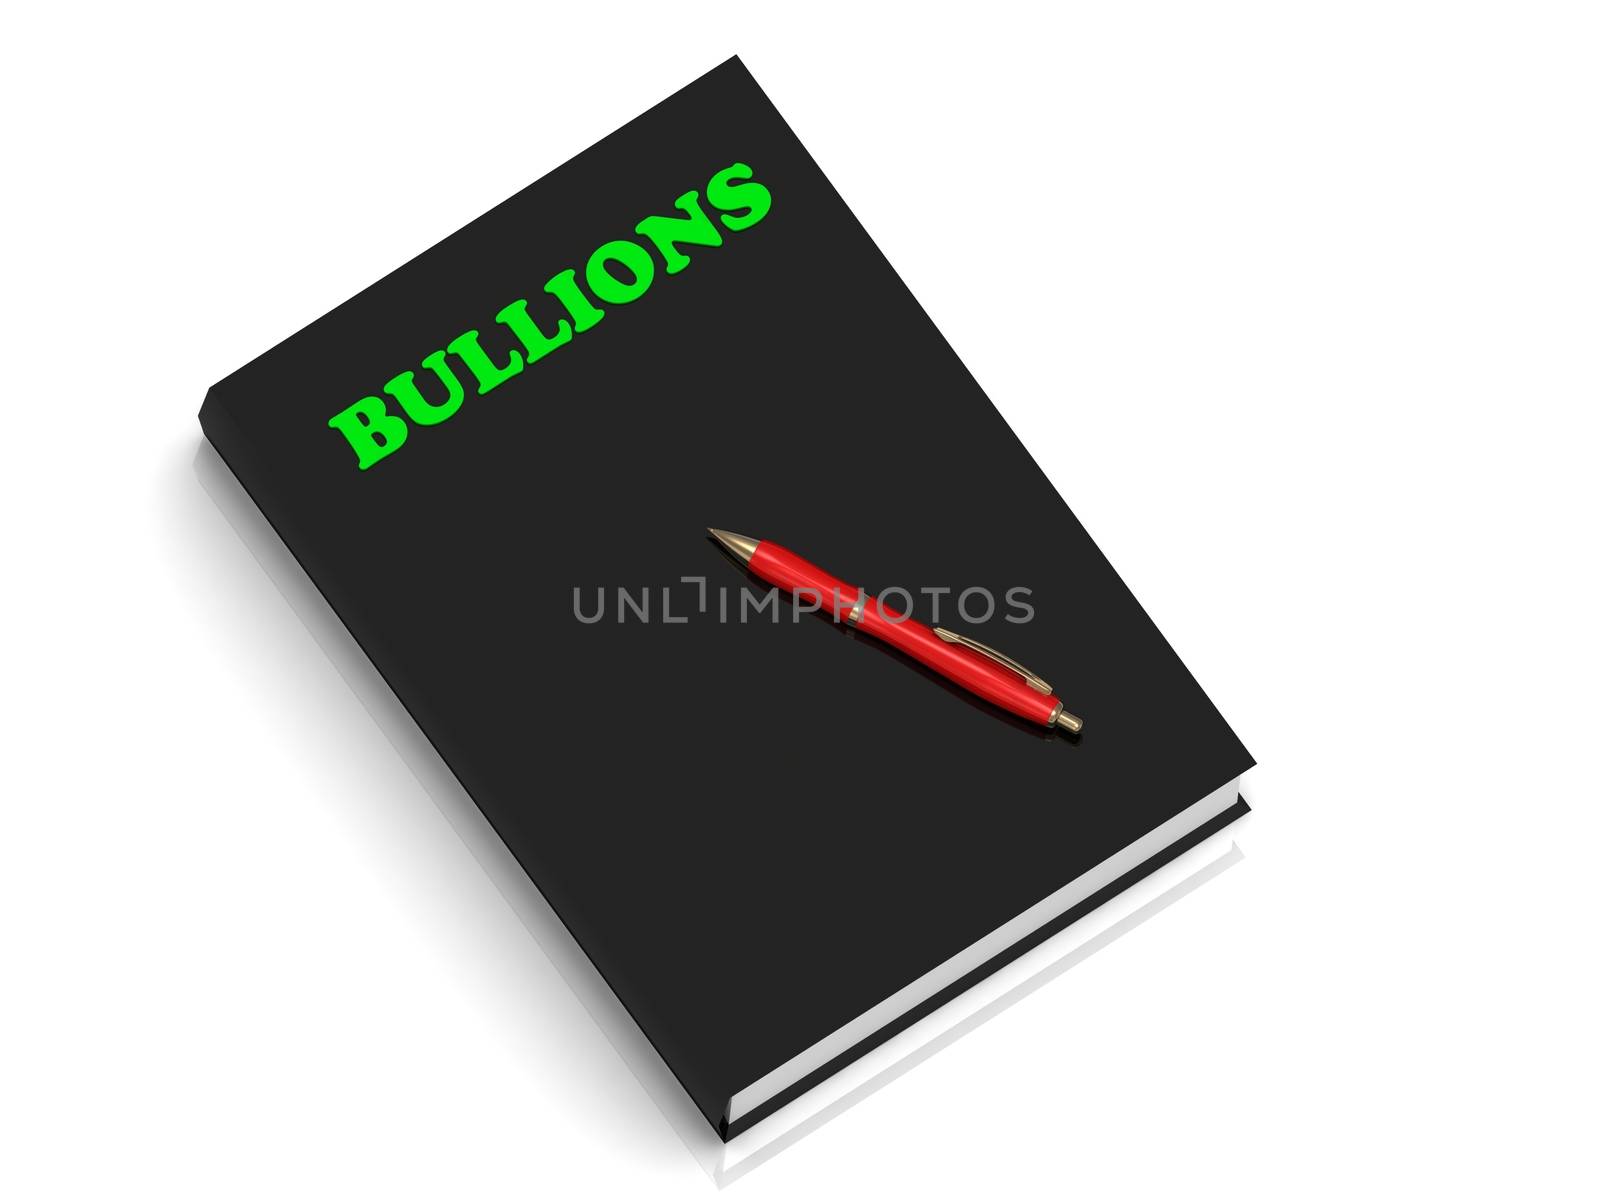 BULLIONS- inscription of green letters on black book by GreenMost